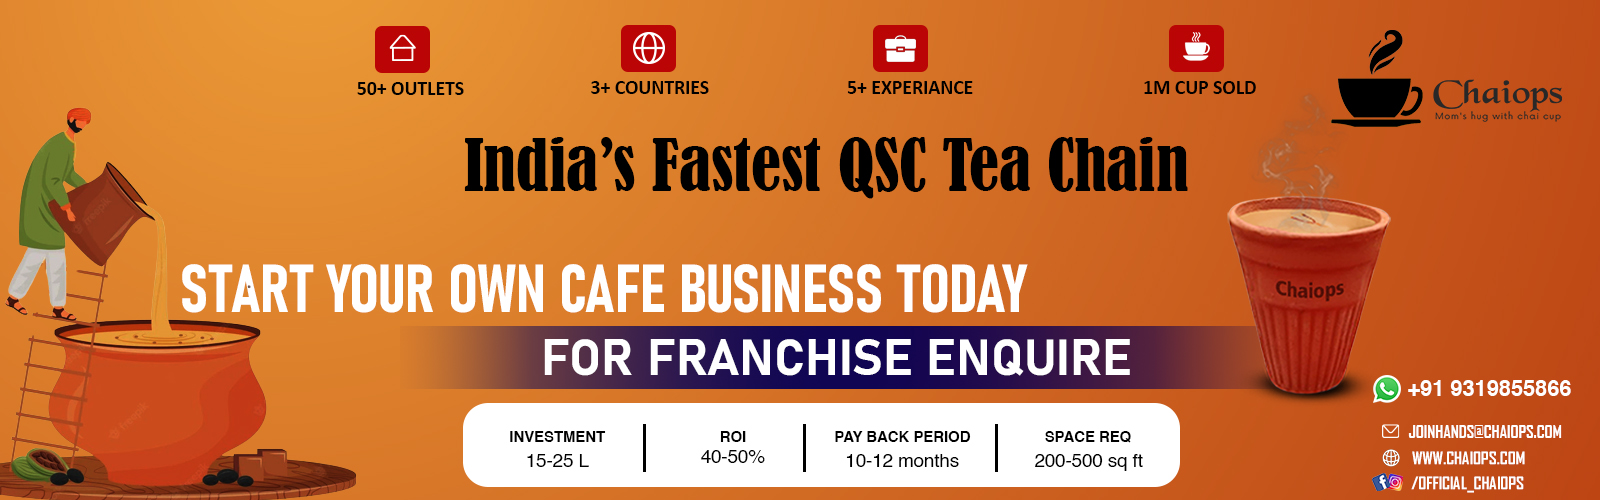 admin/uploads/brand_registration/Chaiops - Be A Franchise With India's Fastest Growing Chai Cafe